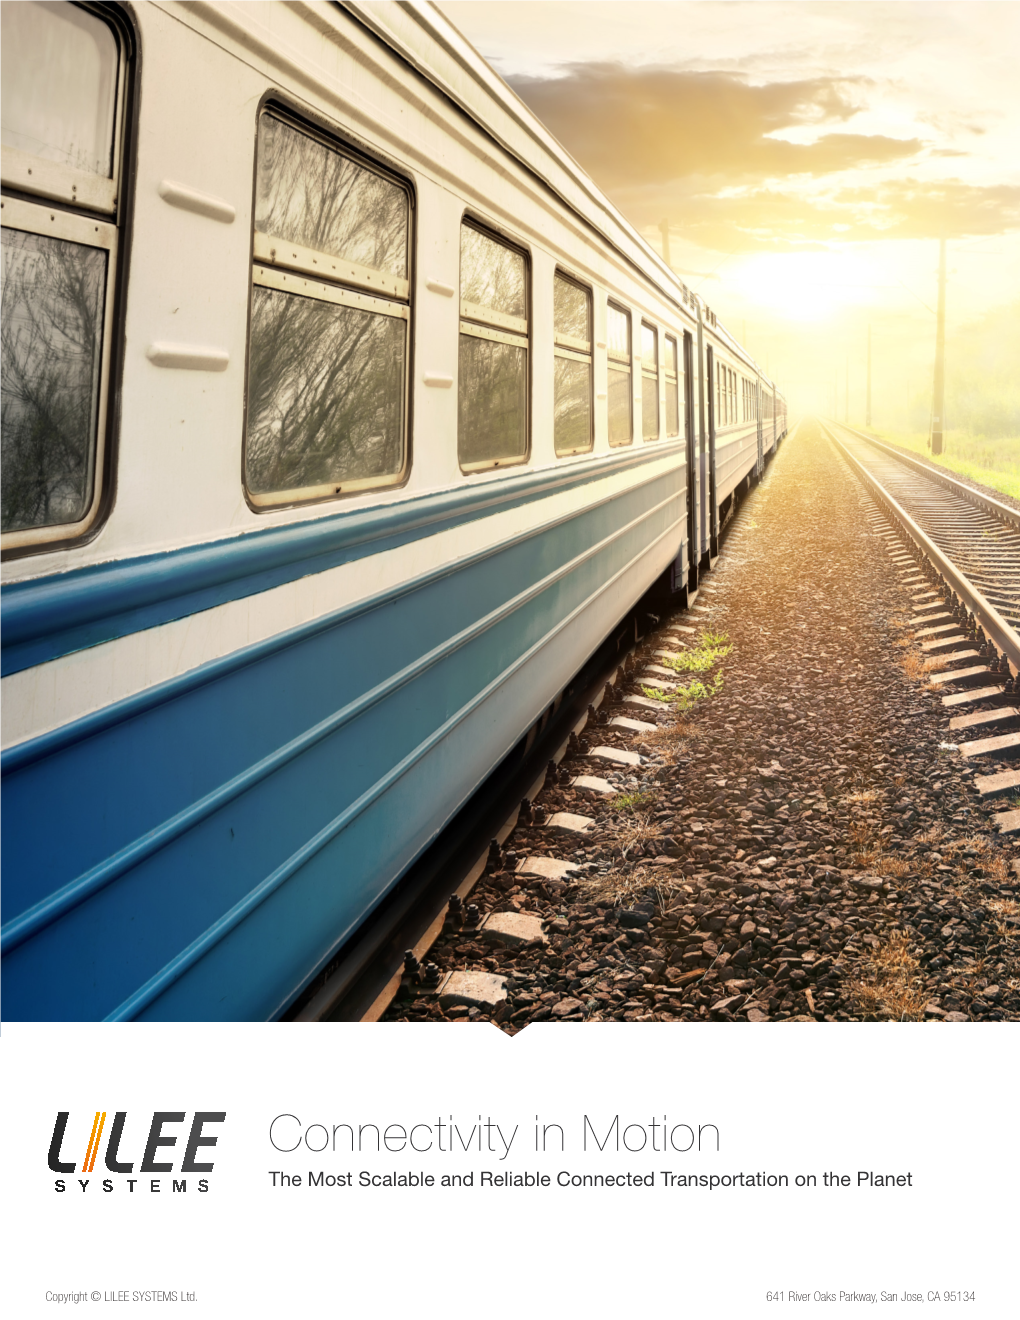 Connectivity in Motion the Most Scalable and Reliable Connected Transportation on the Planet